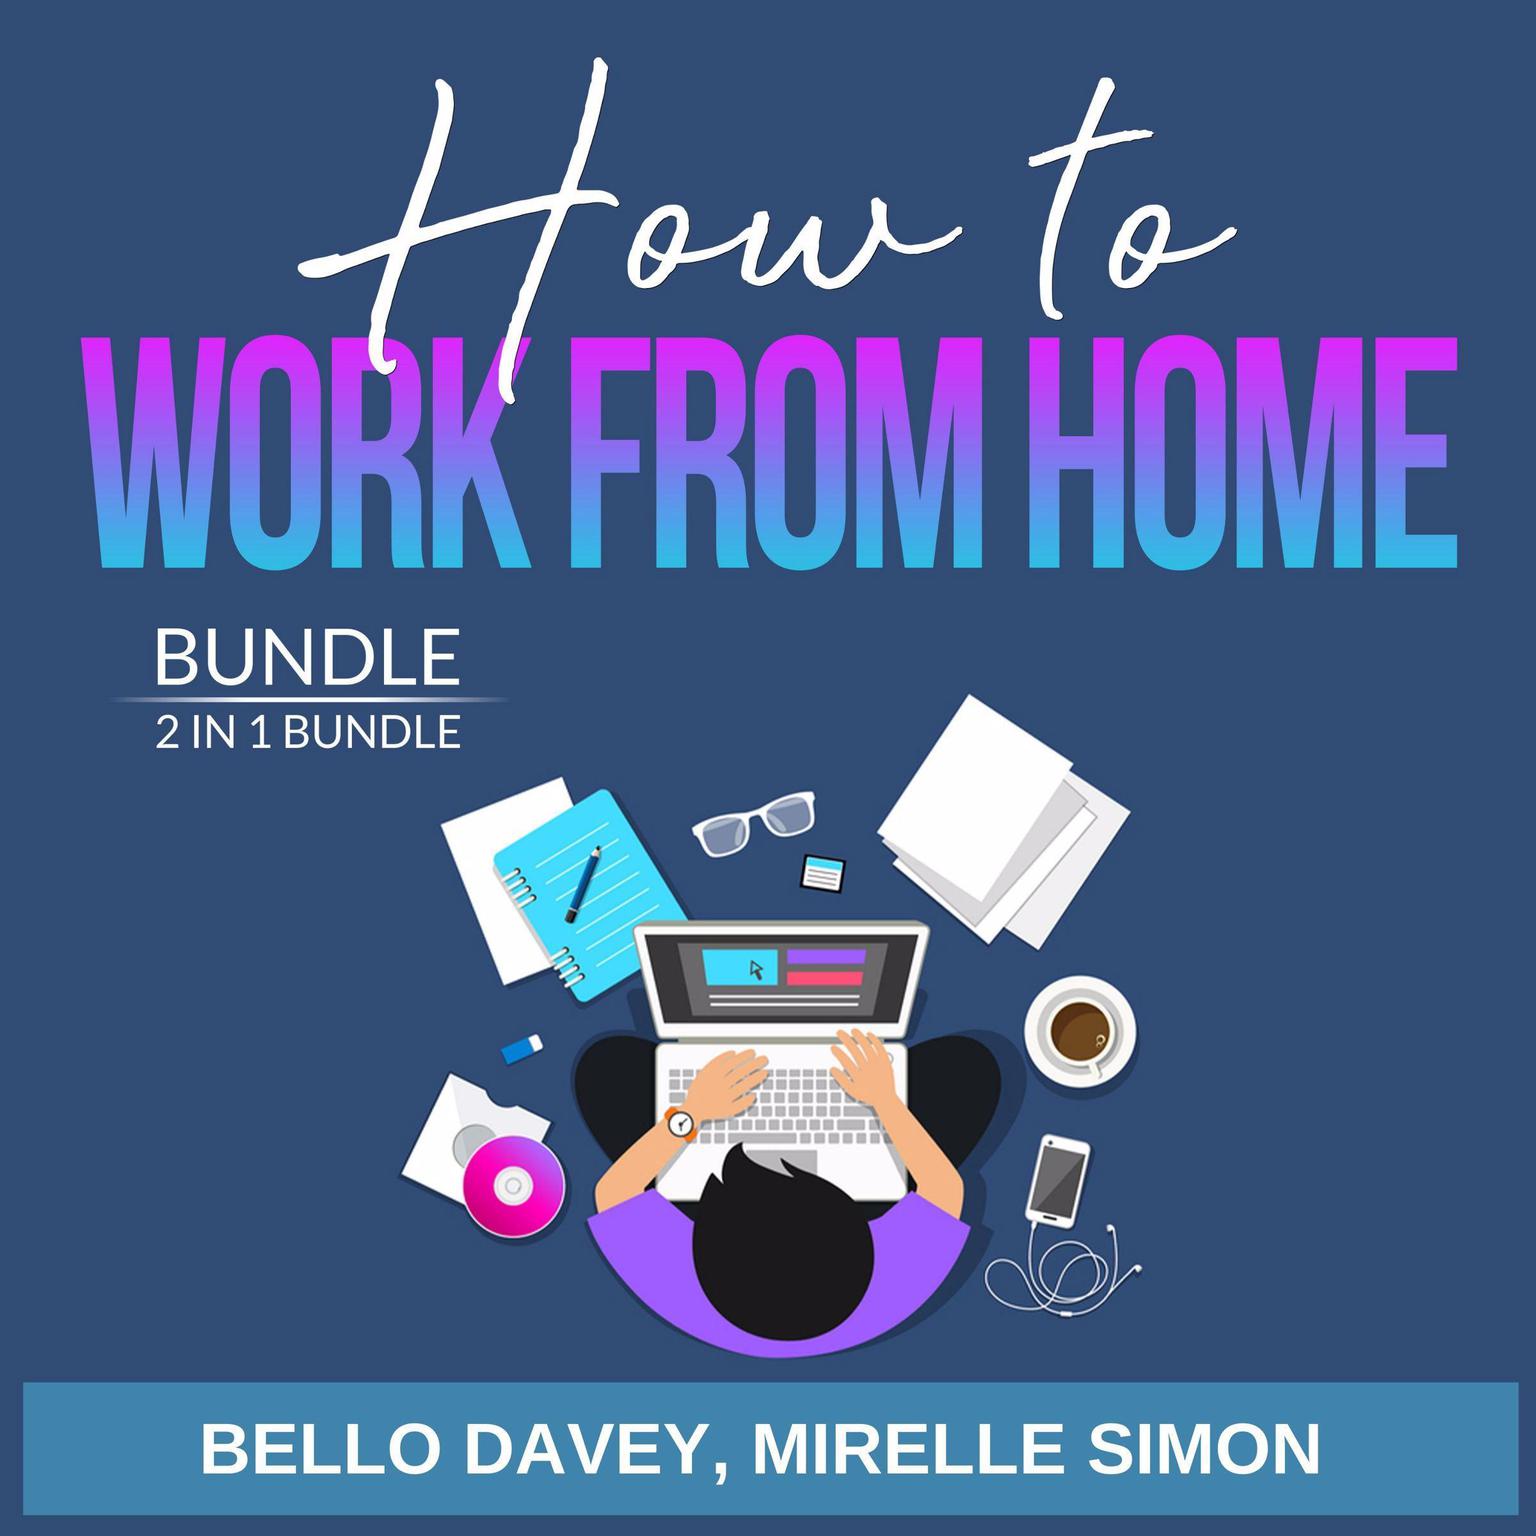 How to Work From Home Bundle, 2 in 1 Bundle: Work From Home Opportunities and Work From Home Audiobook, by Mirelle Simon